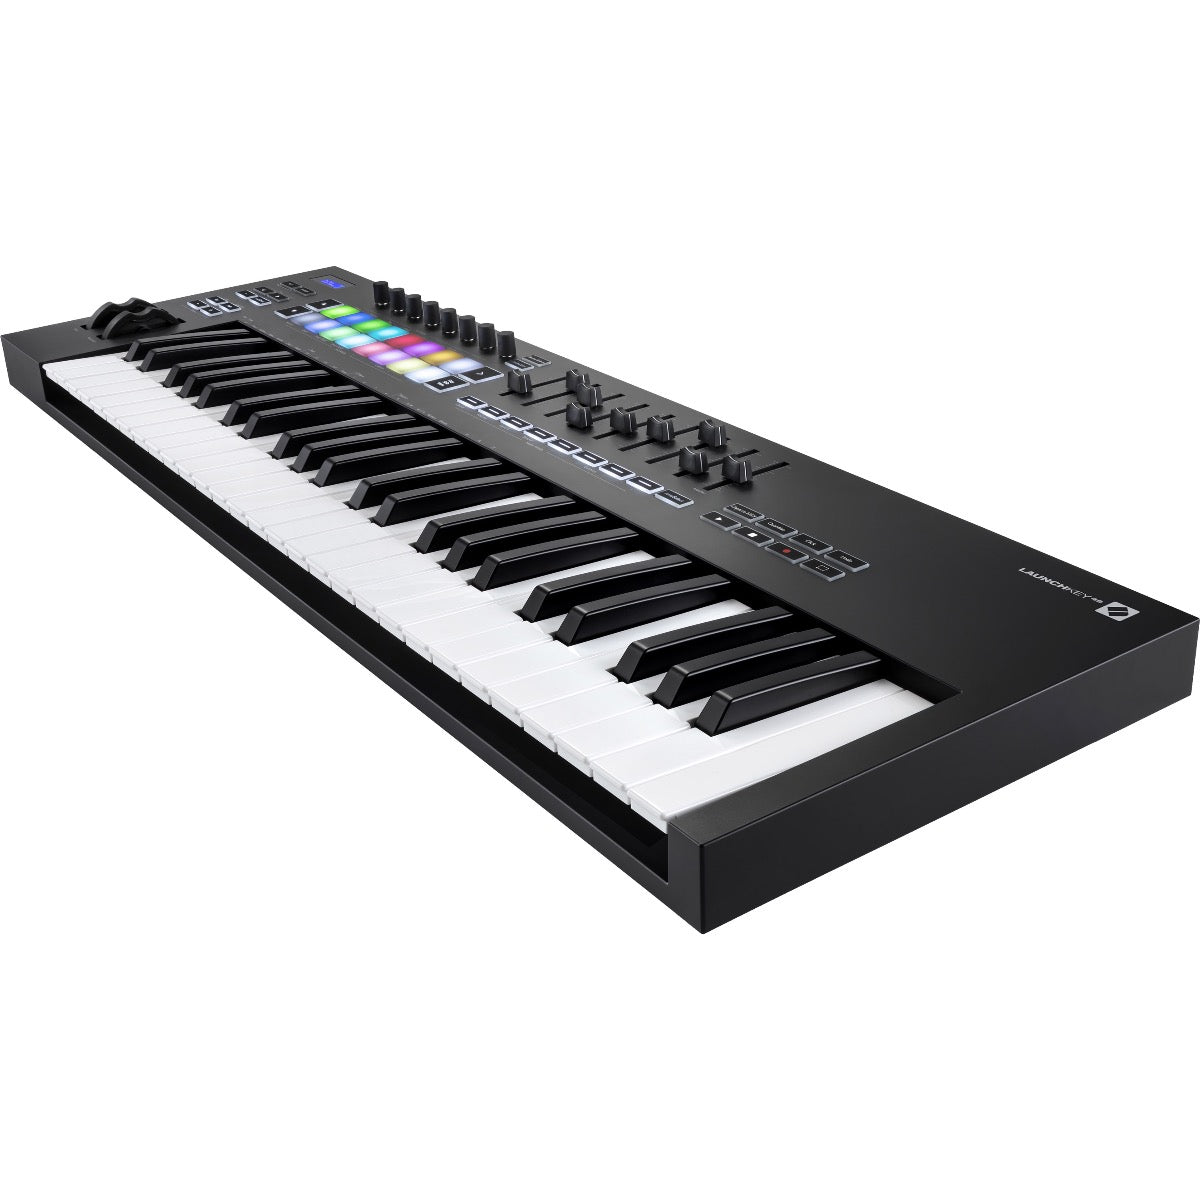 3/4 view of Novation Launchkey 49 MK3 Keyboard Controller showing top, front and right side